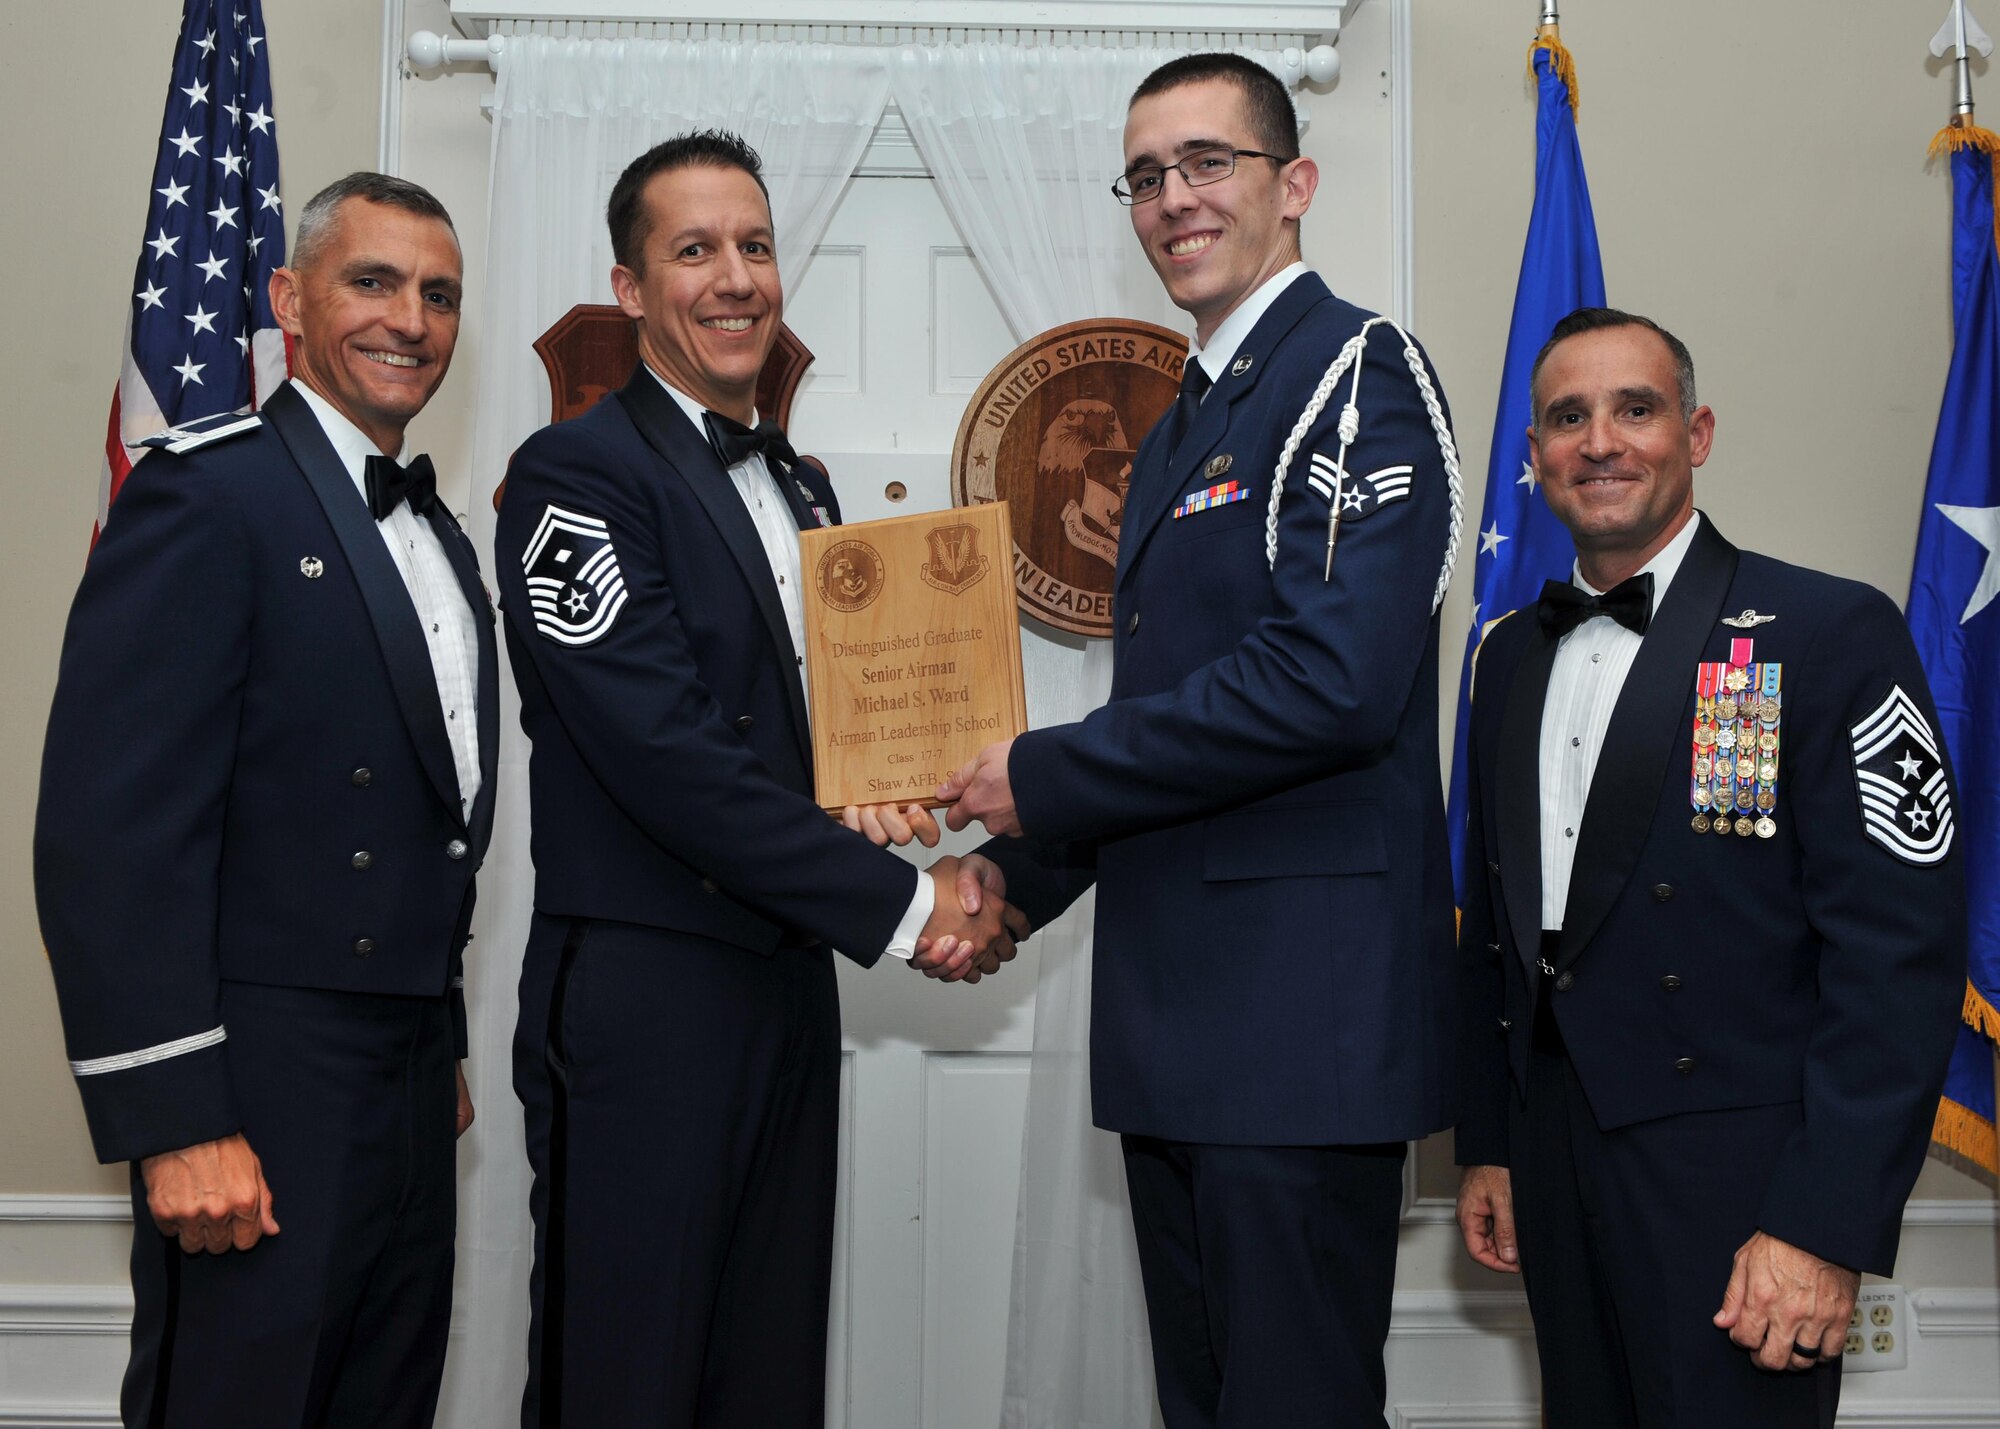 U.S. Air Force Senior Airman Michael Ward, 31st Intelligence Squadron, receives a Distinguished Graduate Award from Senior Master Sgt. Keith Rivers of the Shaw Diamond Council, during the Senior Master Sgt. David B. Reid Airman Leadership School Class 17-7 graduation ceremony at Shaw Air Force Base, S.C., Oct. 6, 2017.